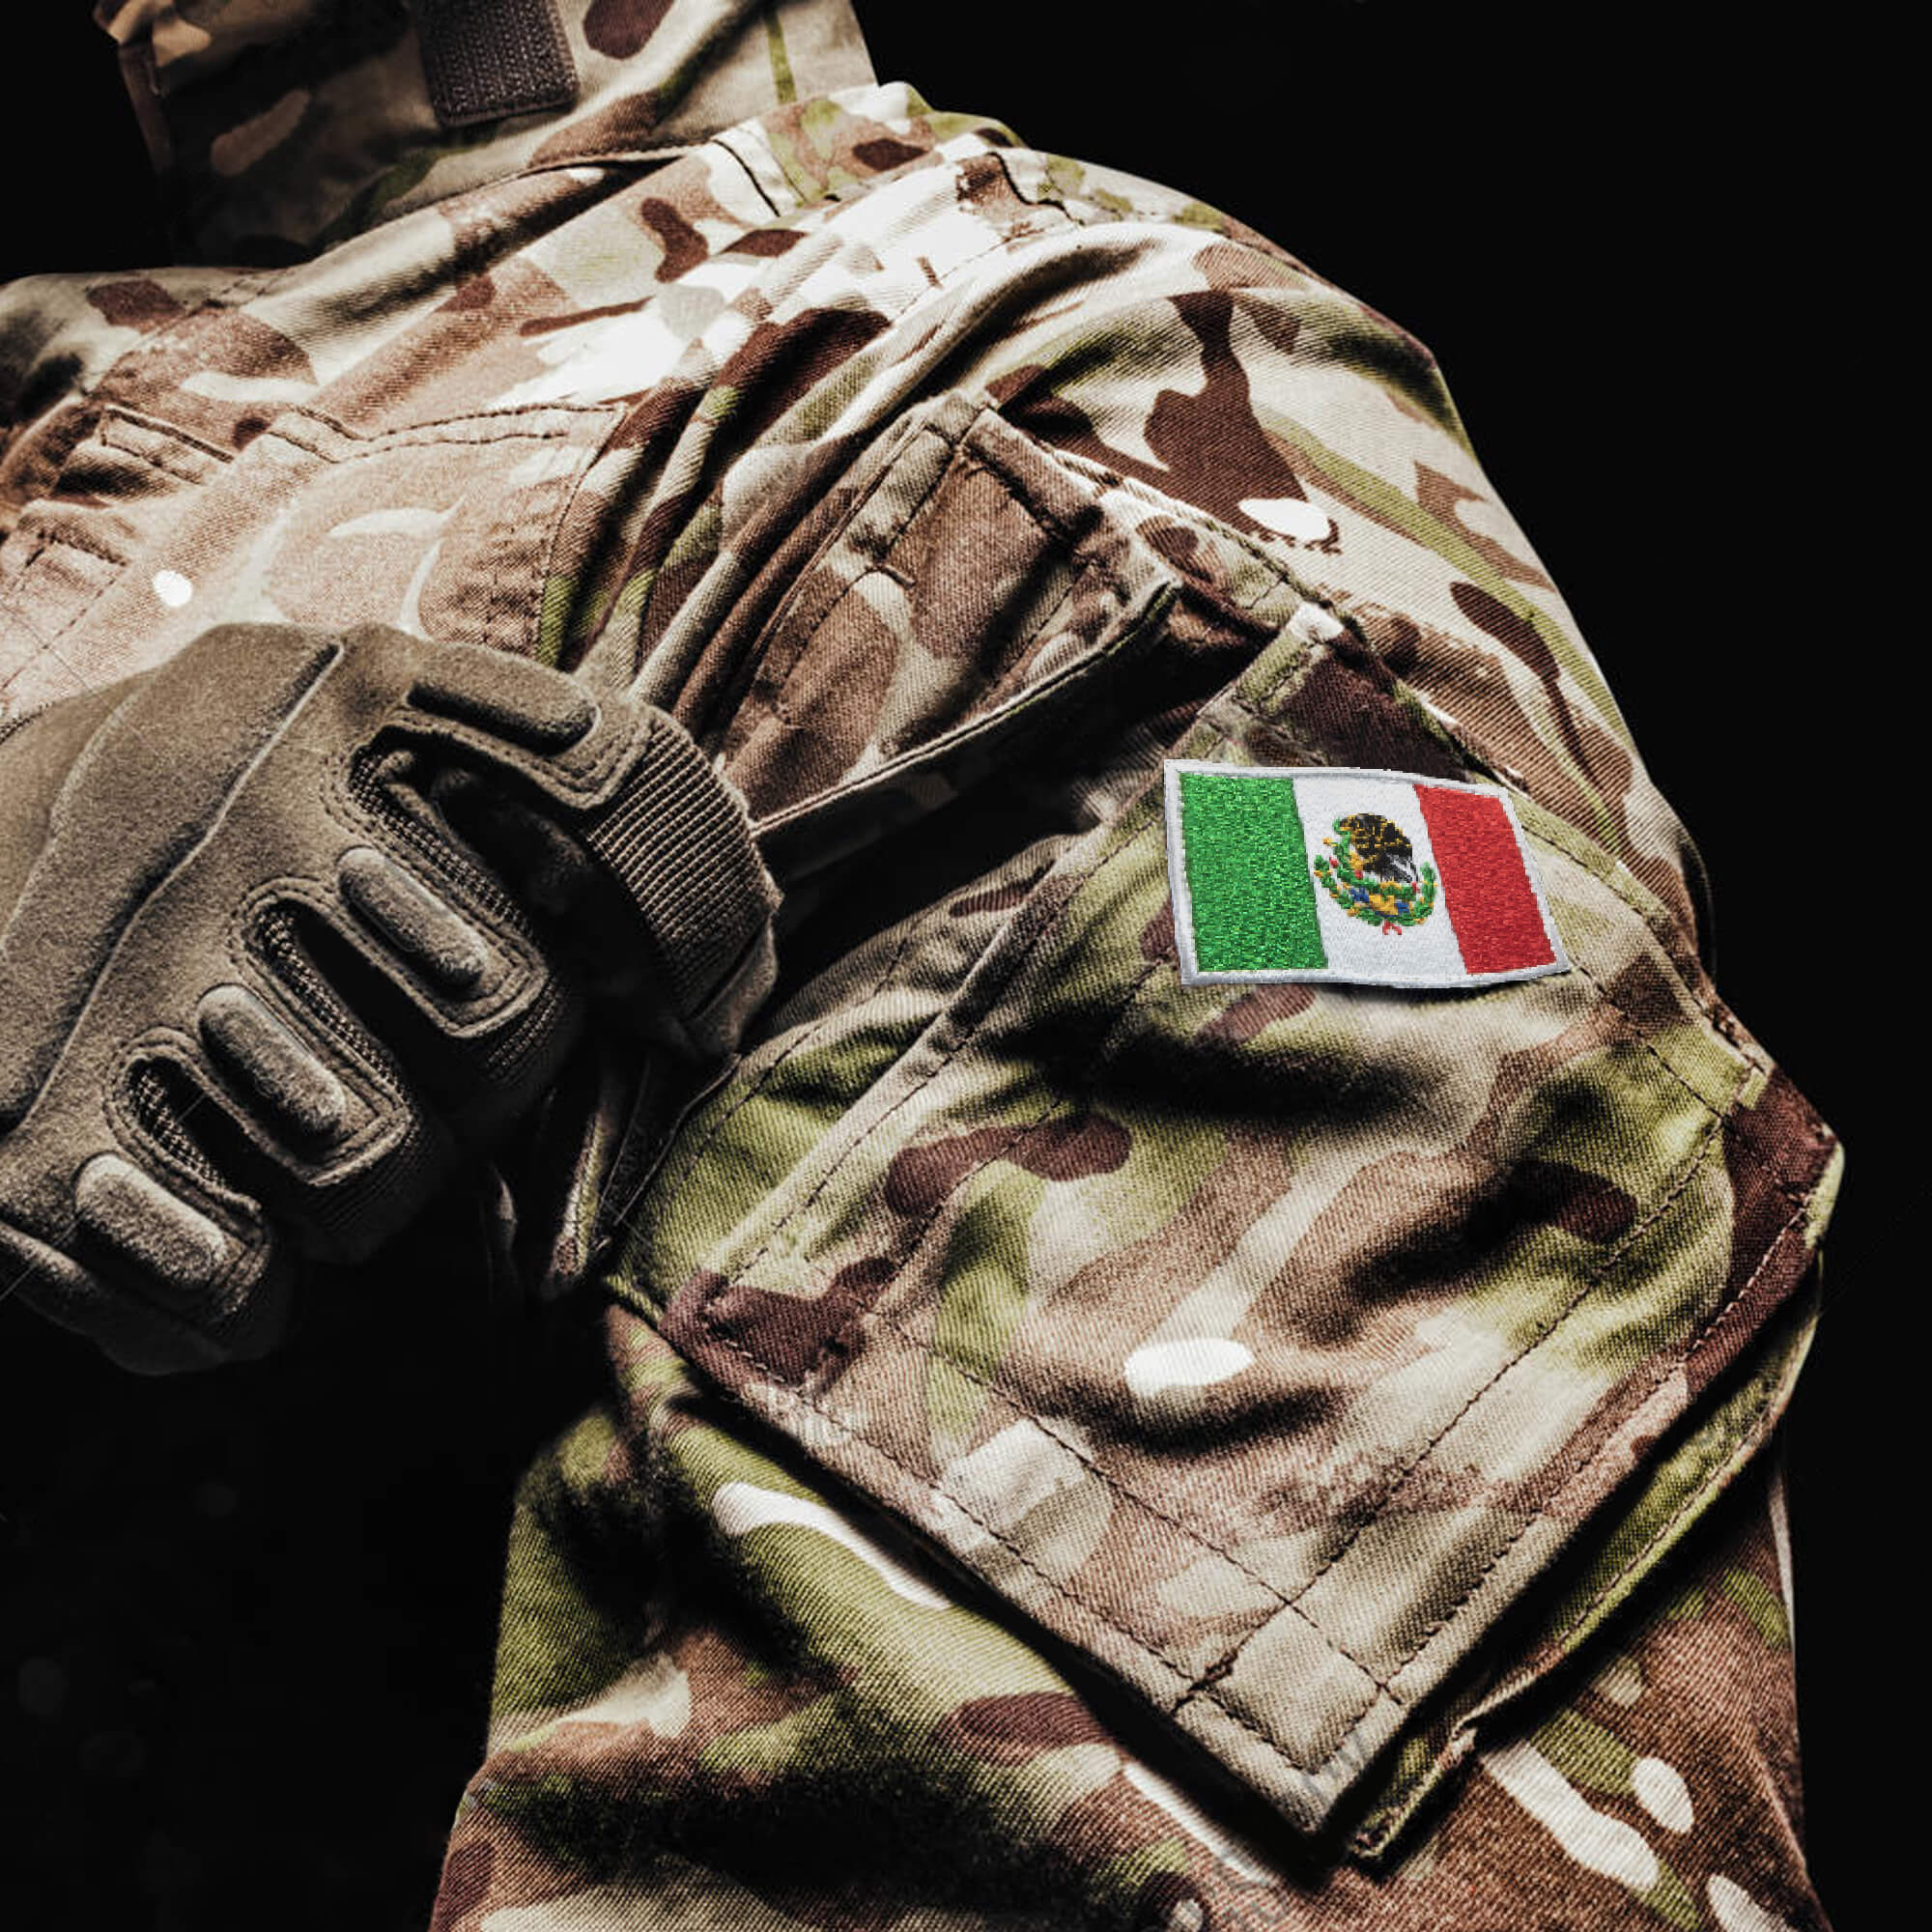 3Pack Mexico Flag Patch Mexican Flags Patchs, Mexico Tactical Flag  Embroidery Patch with, for Hats, Tactical Bags, Jackets, Clothes Patch Team  Military Patch